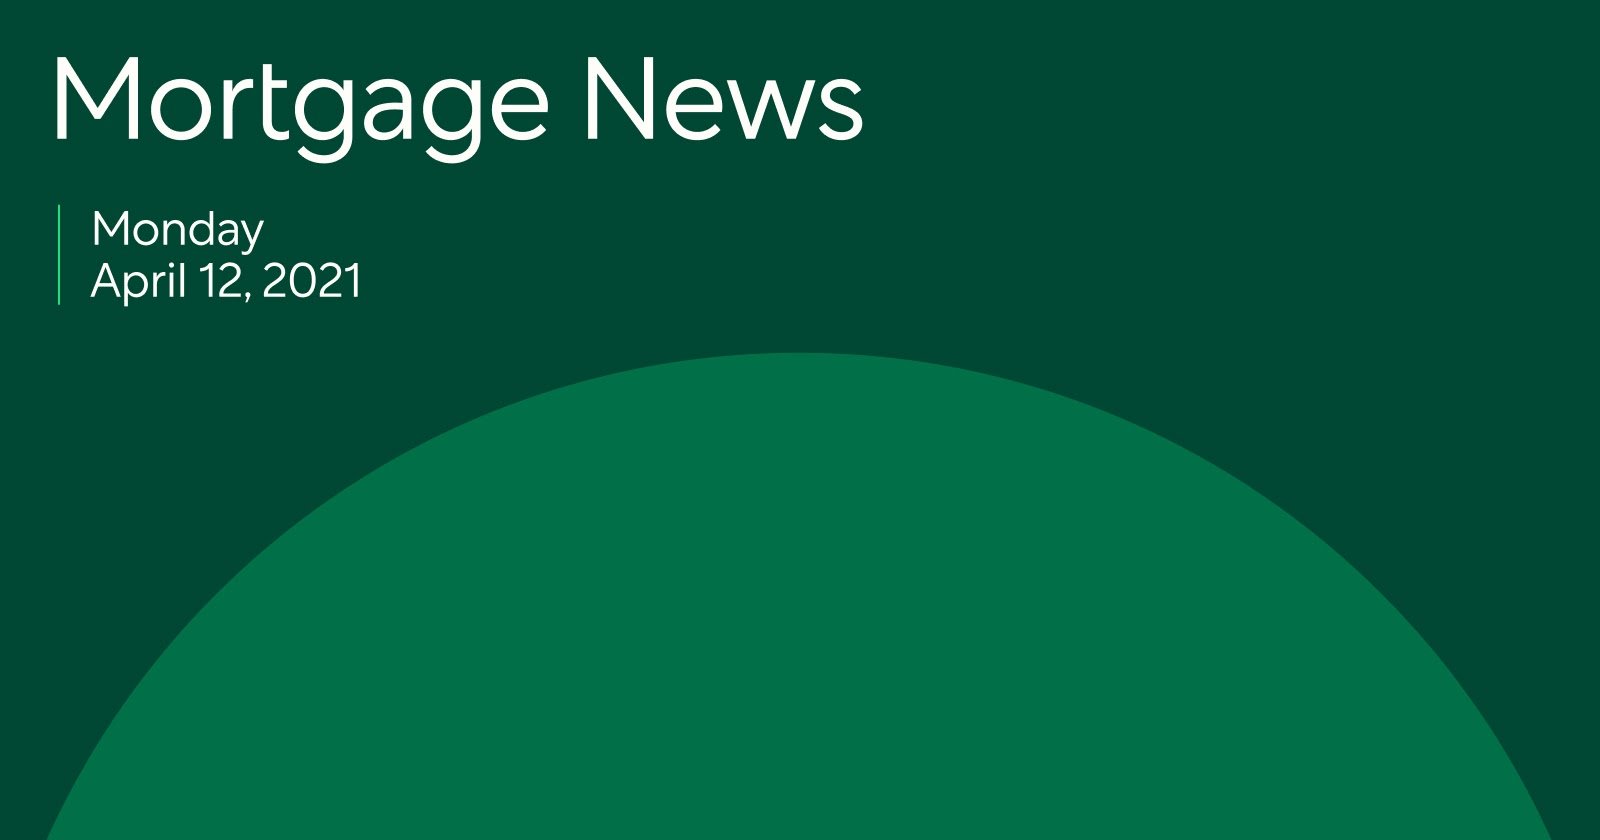 Mortgage News 4/12/2021: Rates Took A Dip. Is It Time To Refinance?